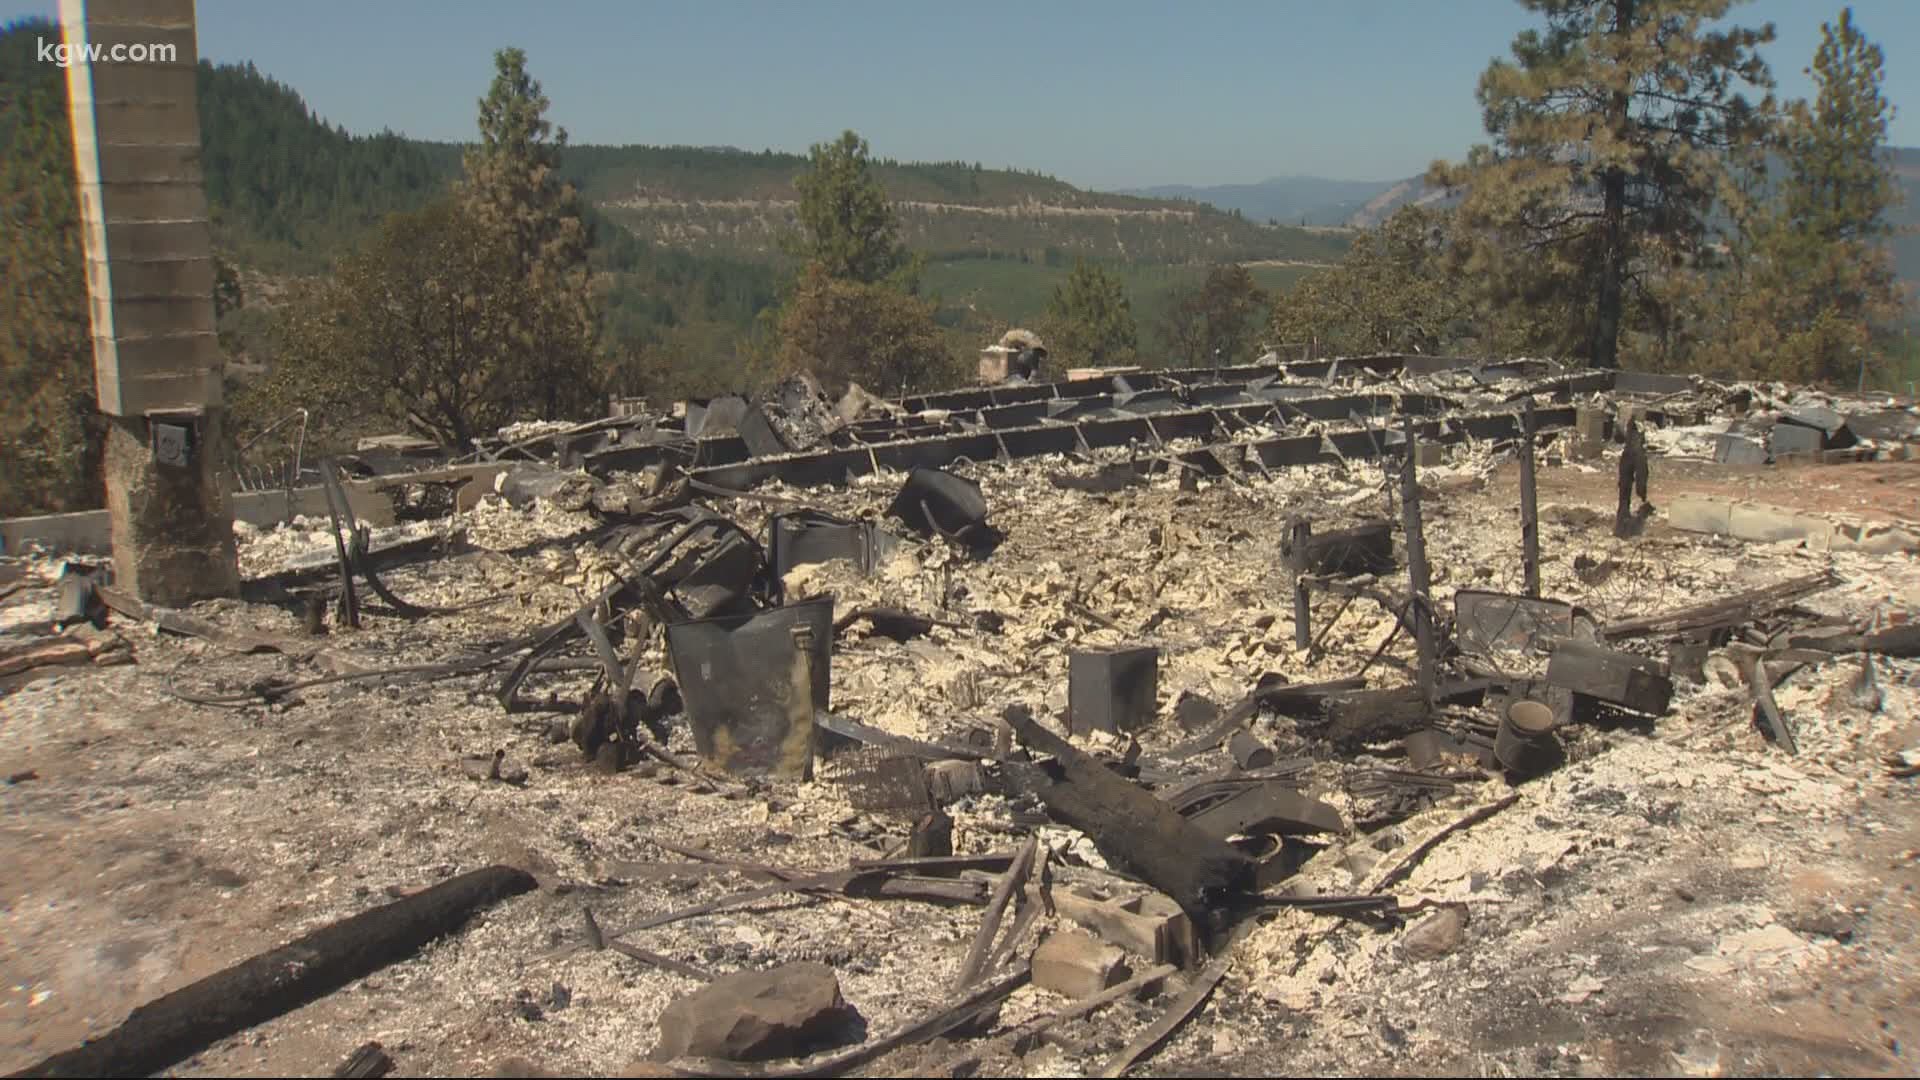 Crews are optimistic about the Mosier Creek Fire moving forward, but at least two homes have already been destroyed.